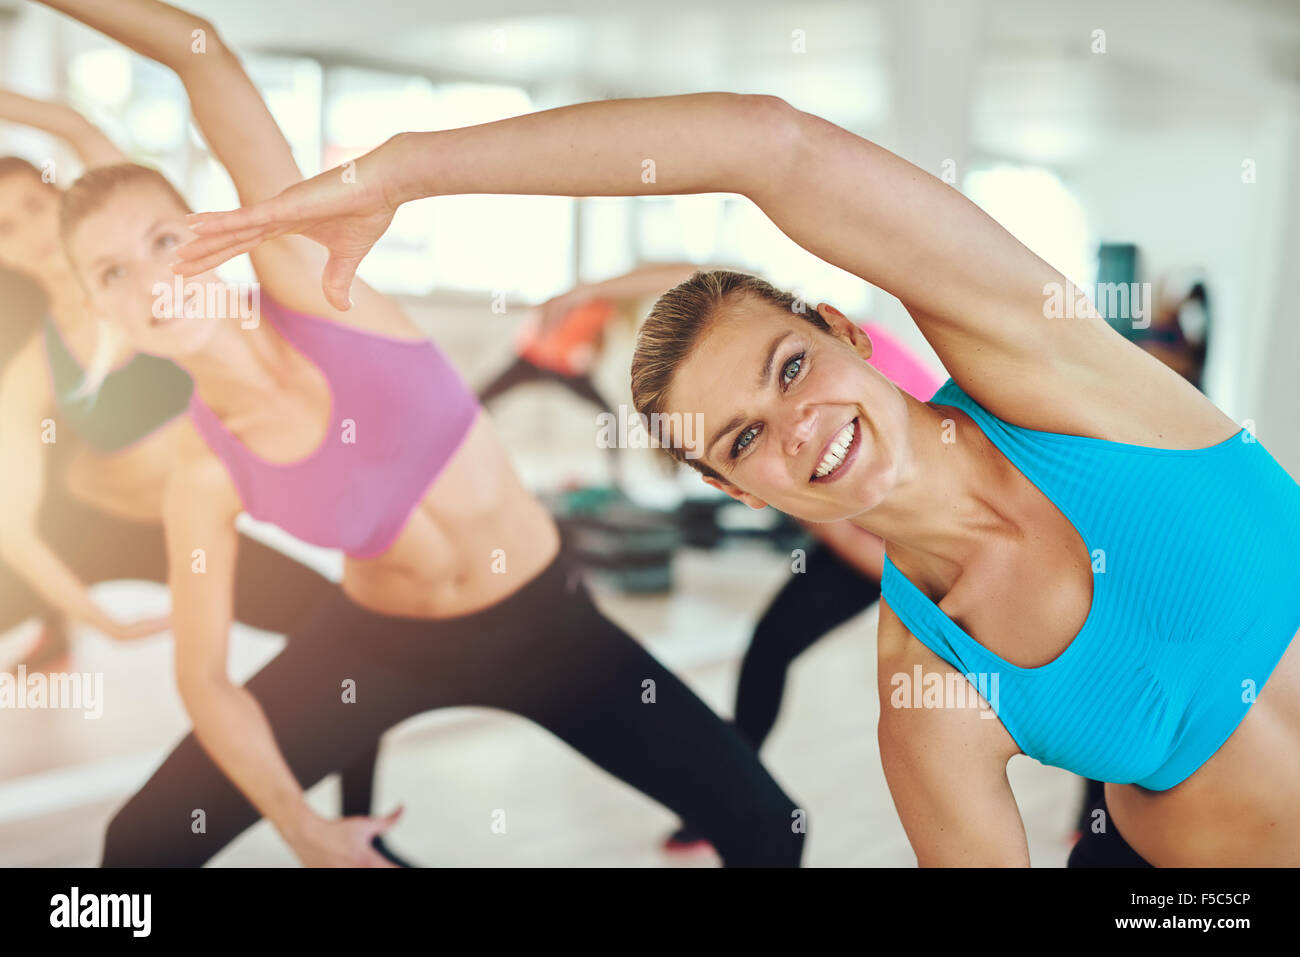 fitness, sport, training and lifestyle concept - group of smiling women stretching in gym Stock Photo